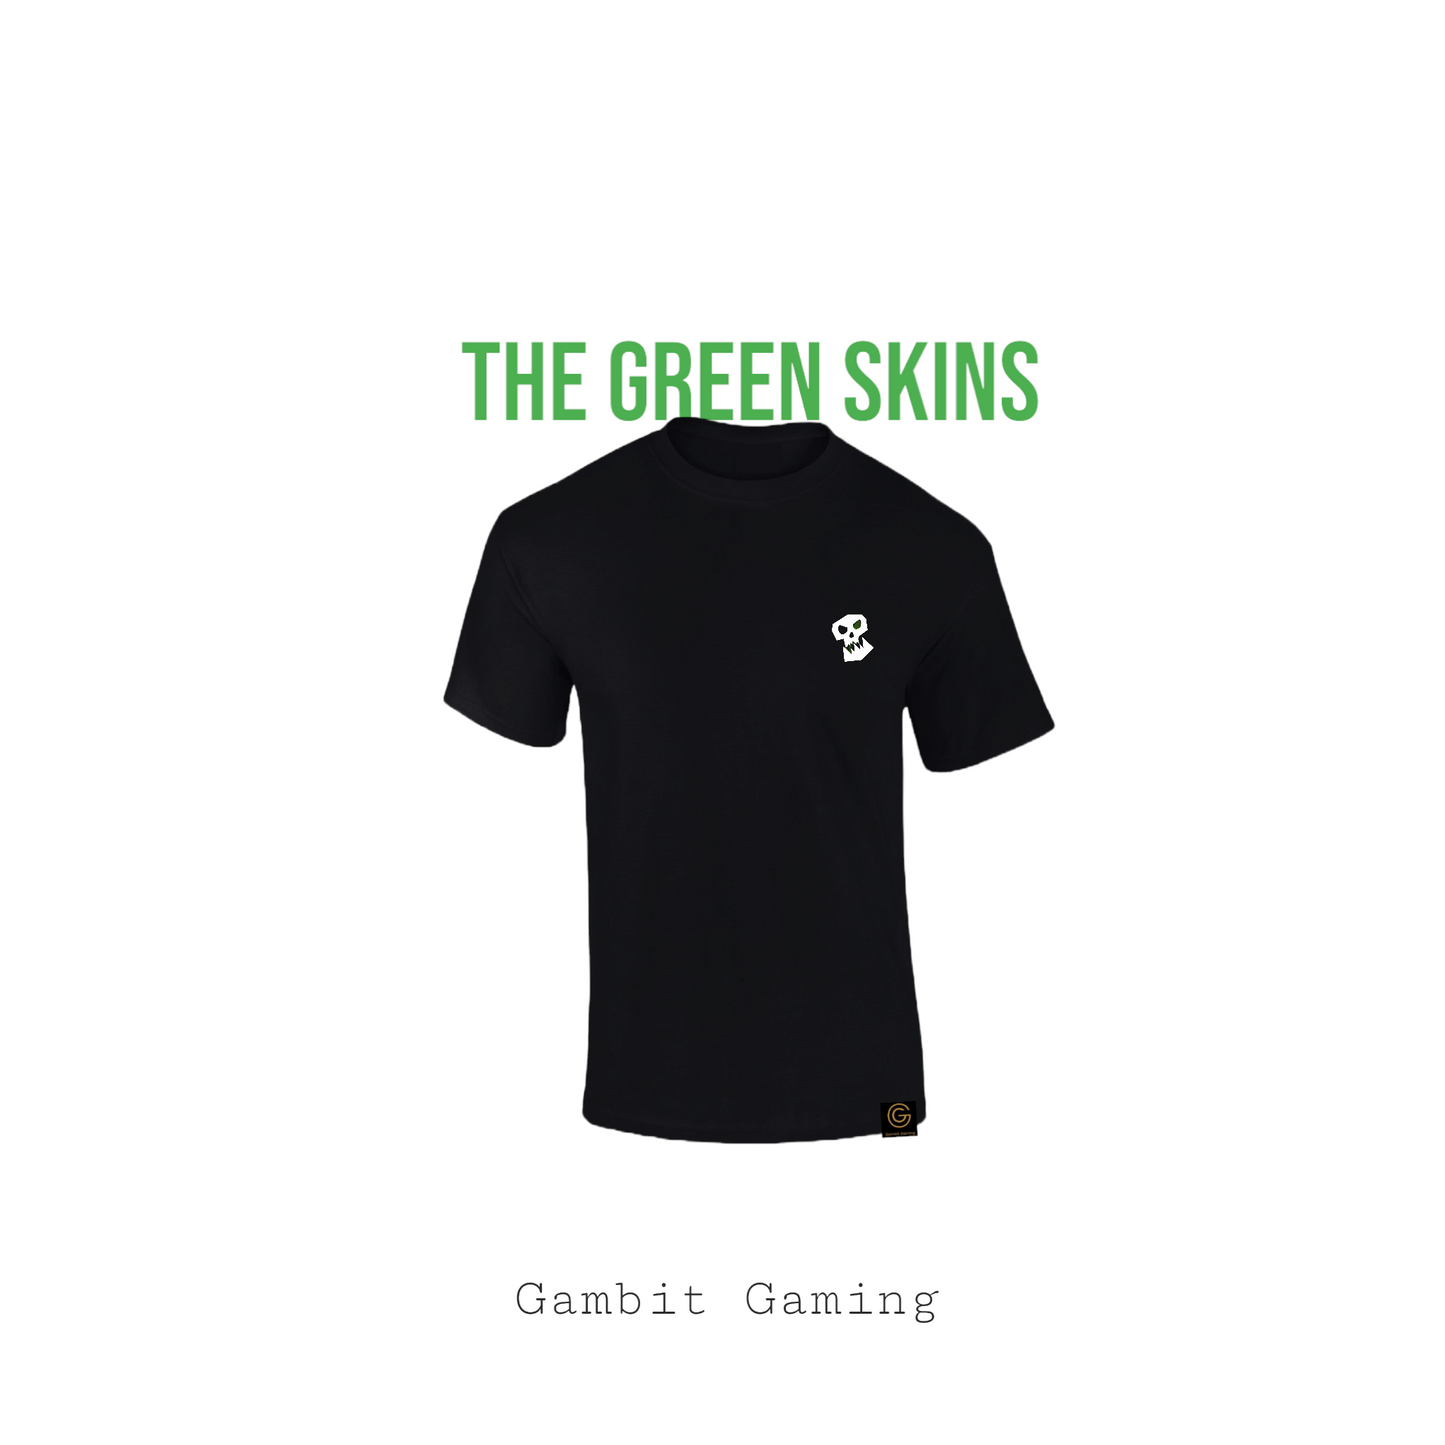 The Green Skins